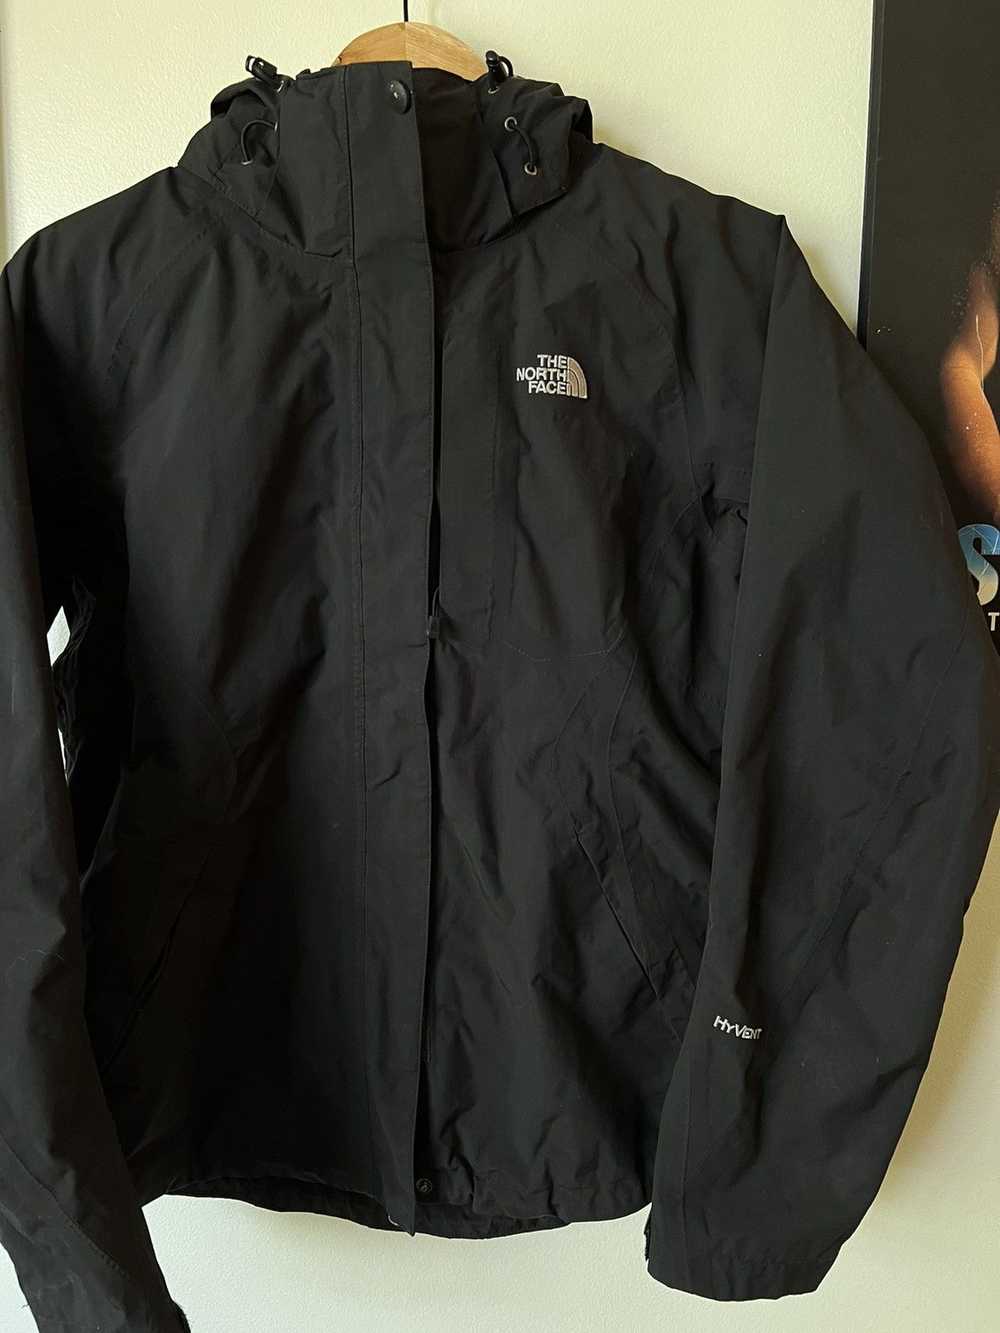 The North Face The North Face Jacket - image 2